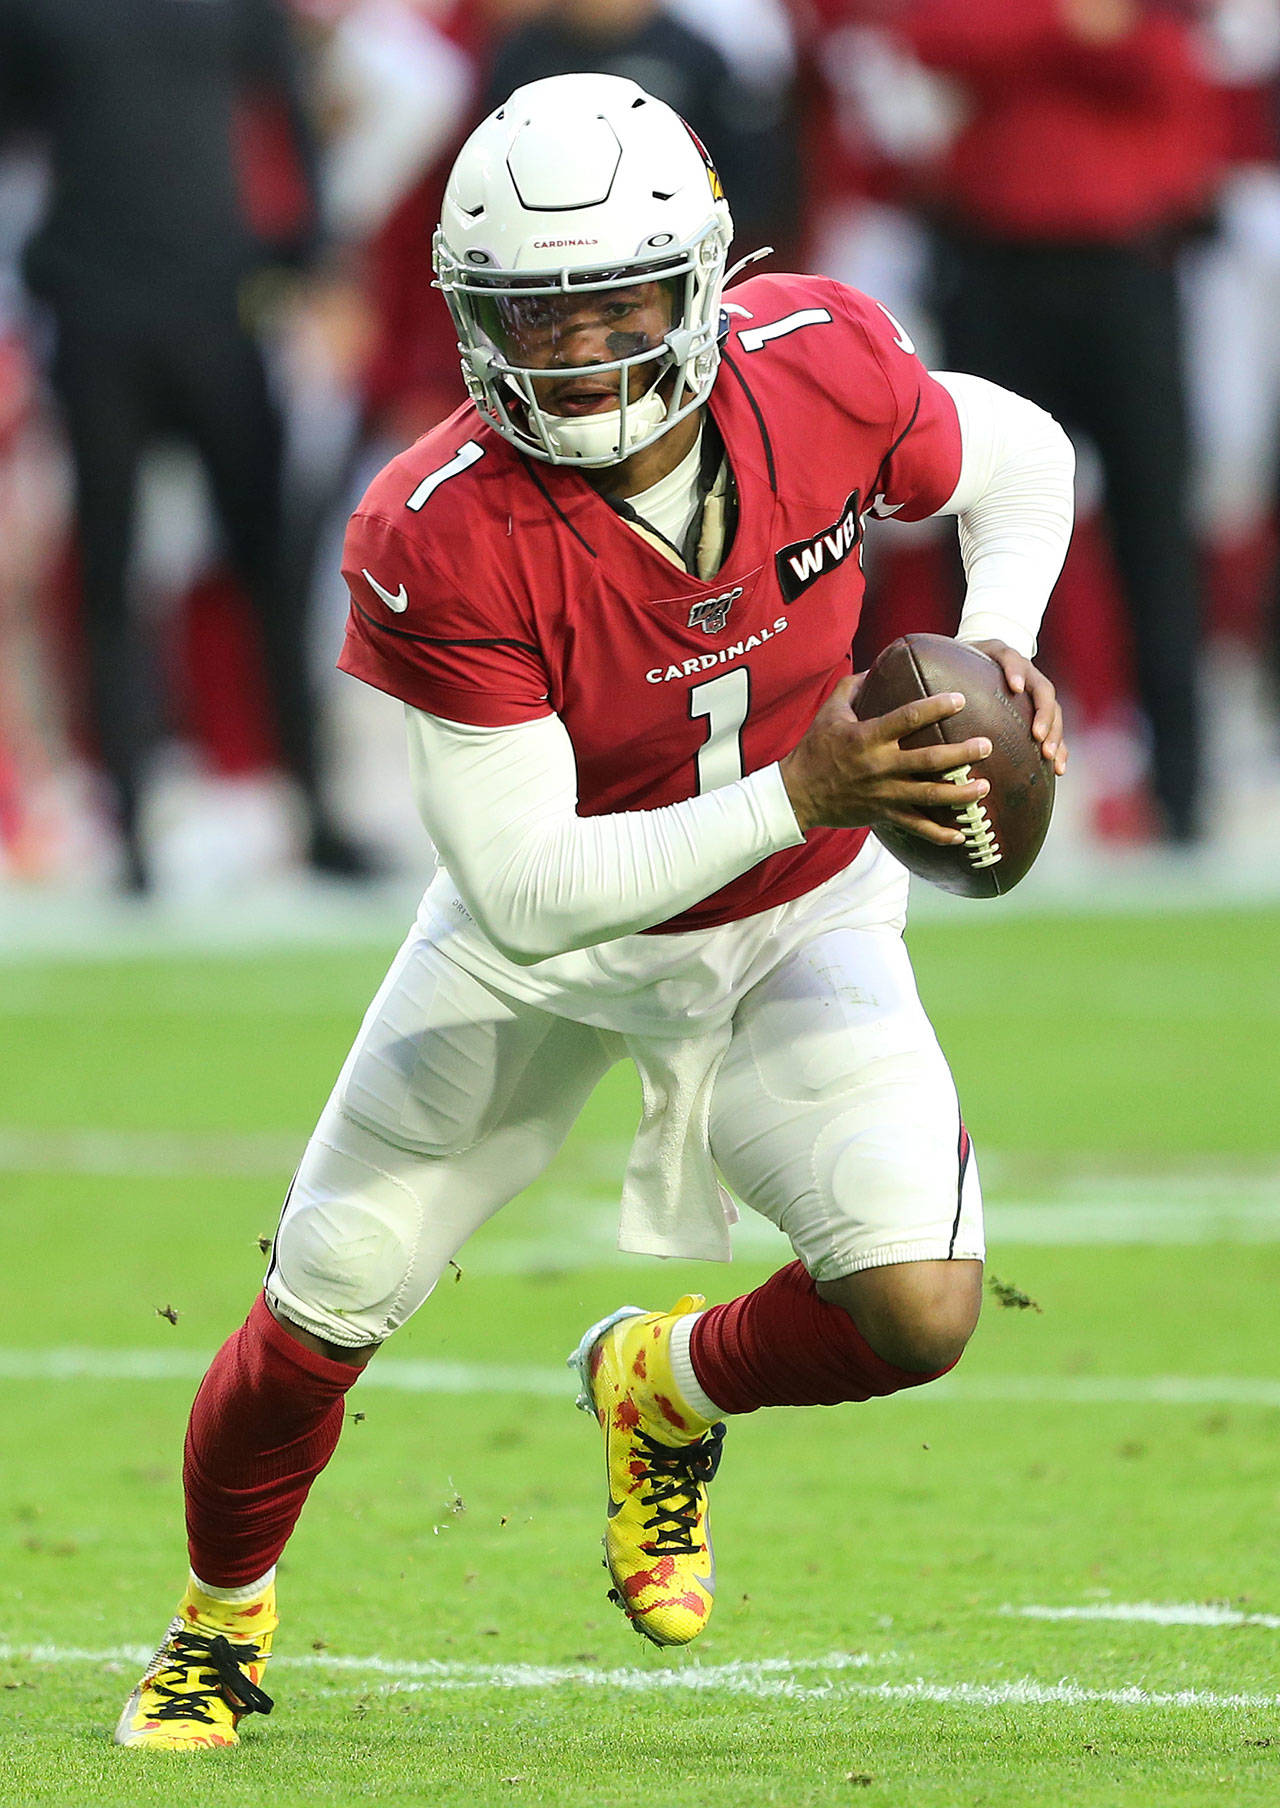 Arizona Cardinals quarterback Kyler Murray takes off on a keeper in the first quarter, December 15, 2019, at State Farm Stadium. (Tribune News Service)